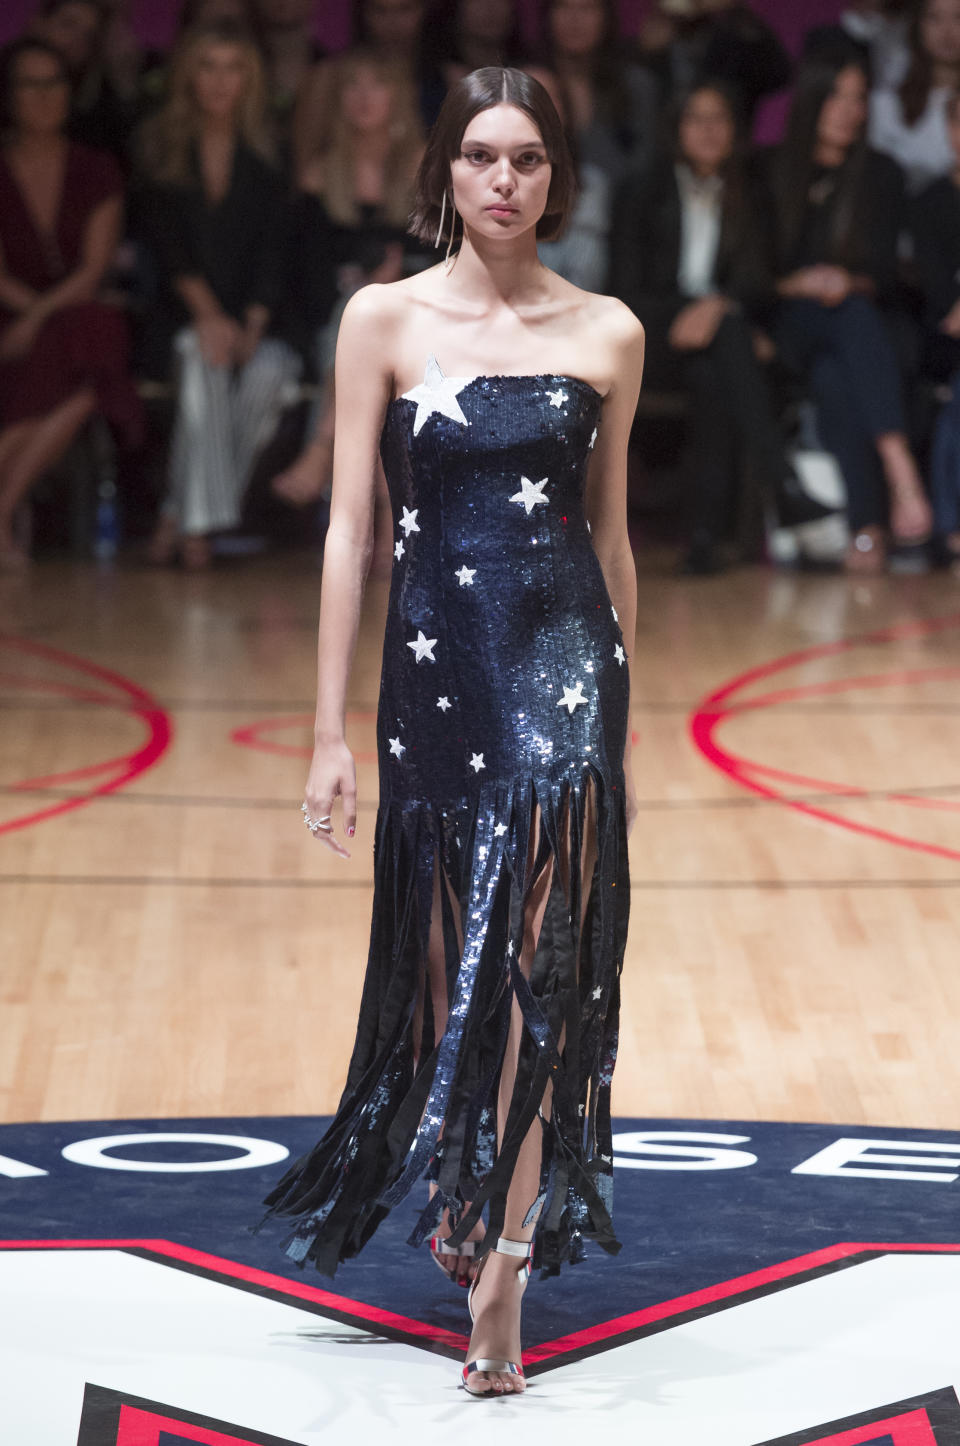 <p><i>Models wears a patriotic, star-sequined dress with fringes from the SS18 Monse collection. (Photo: IMAXtree) </i></p>